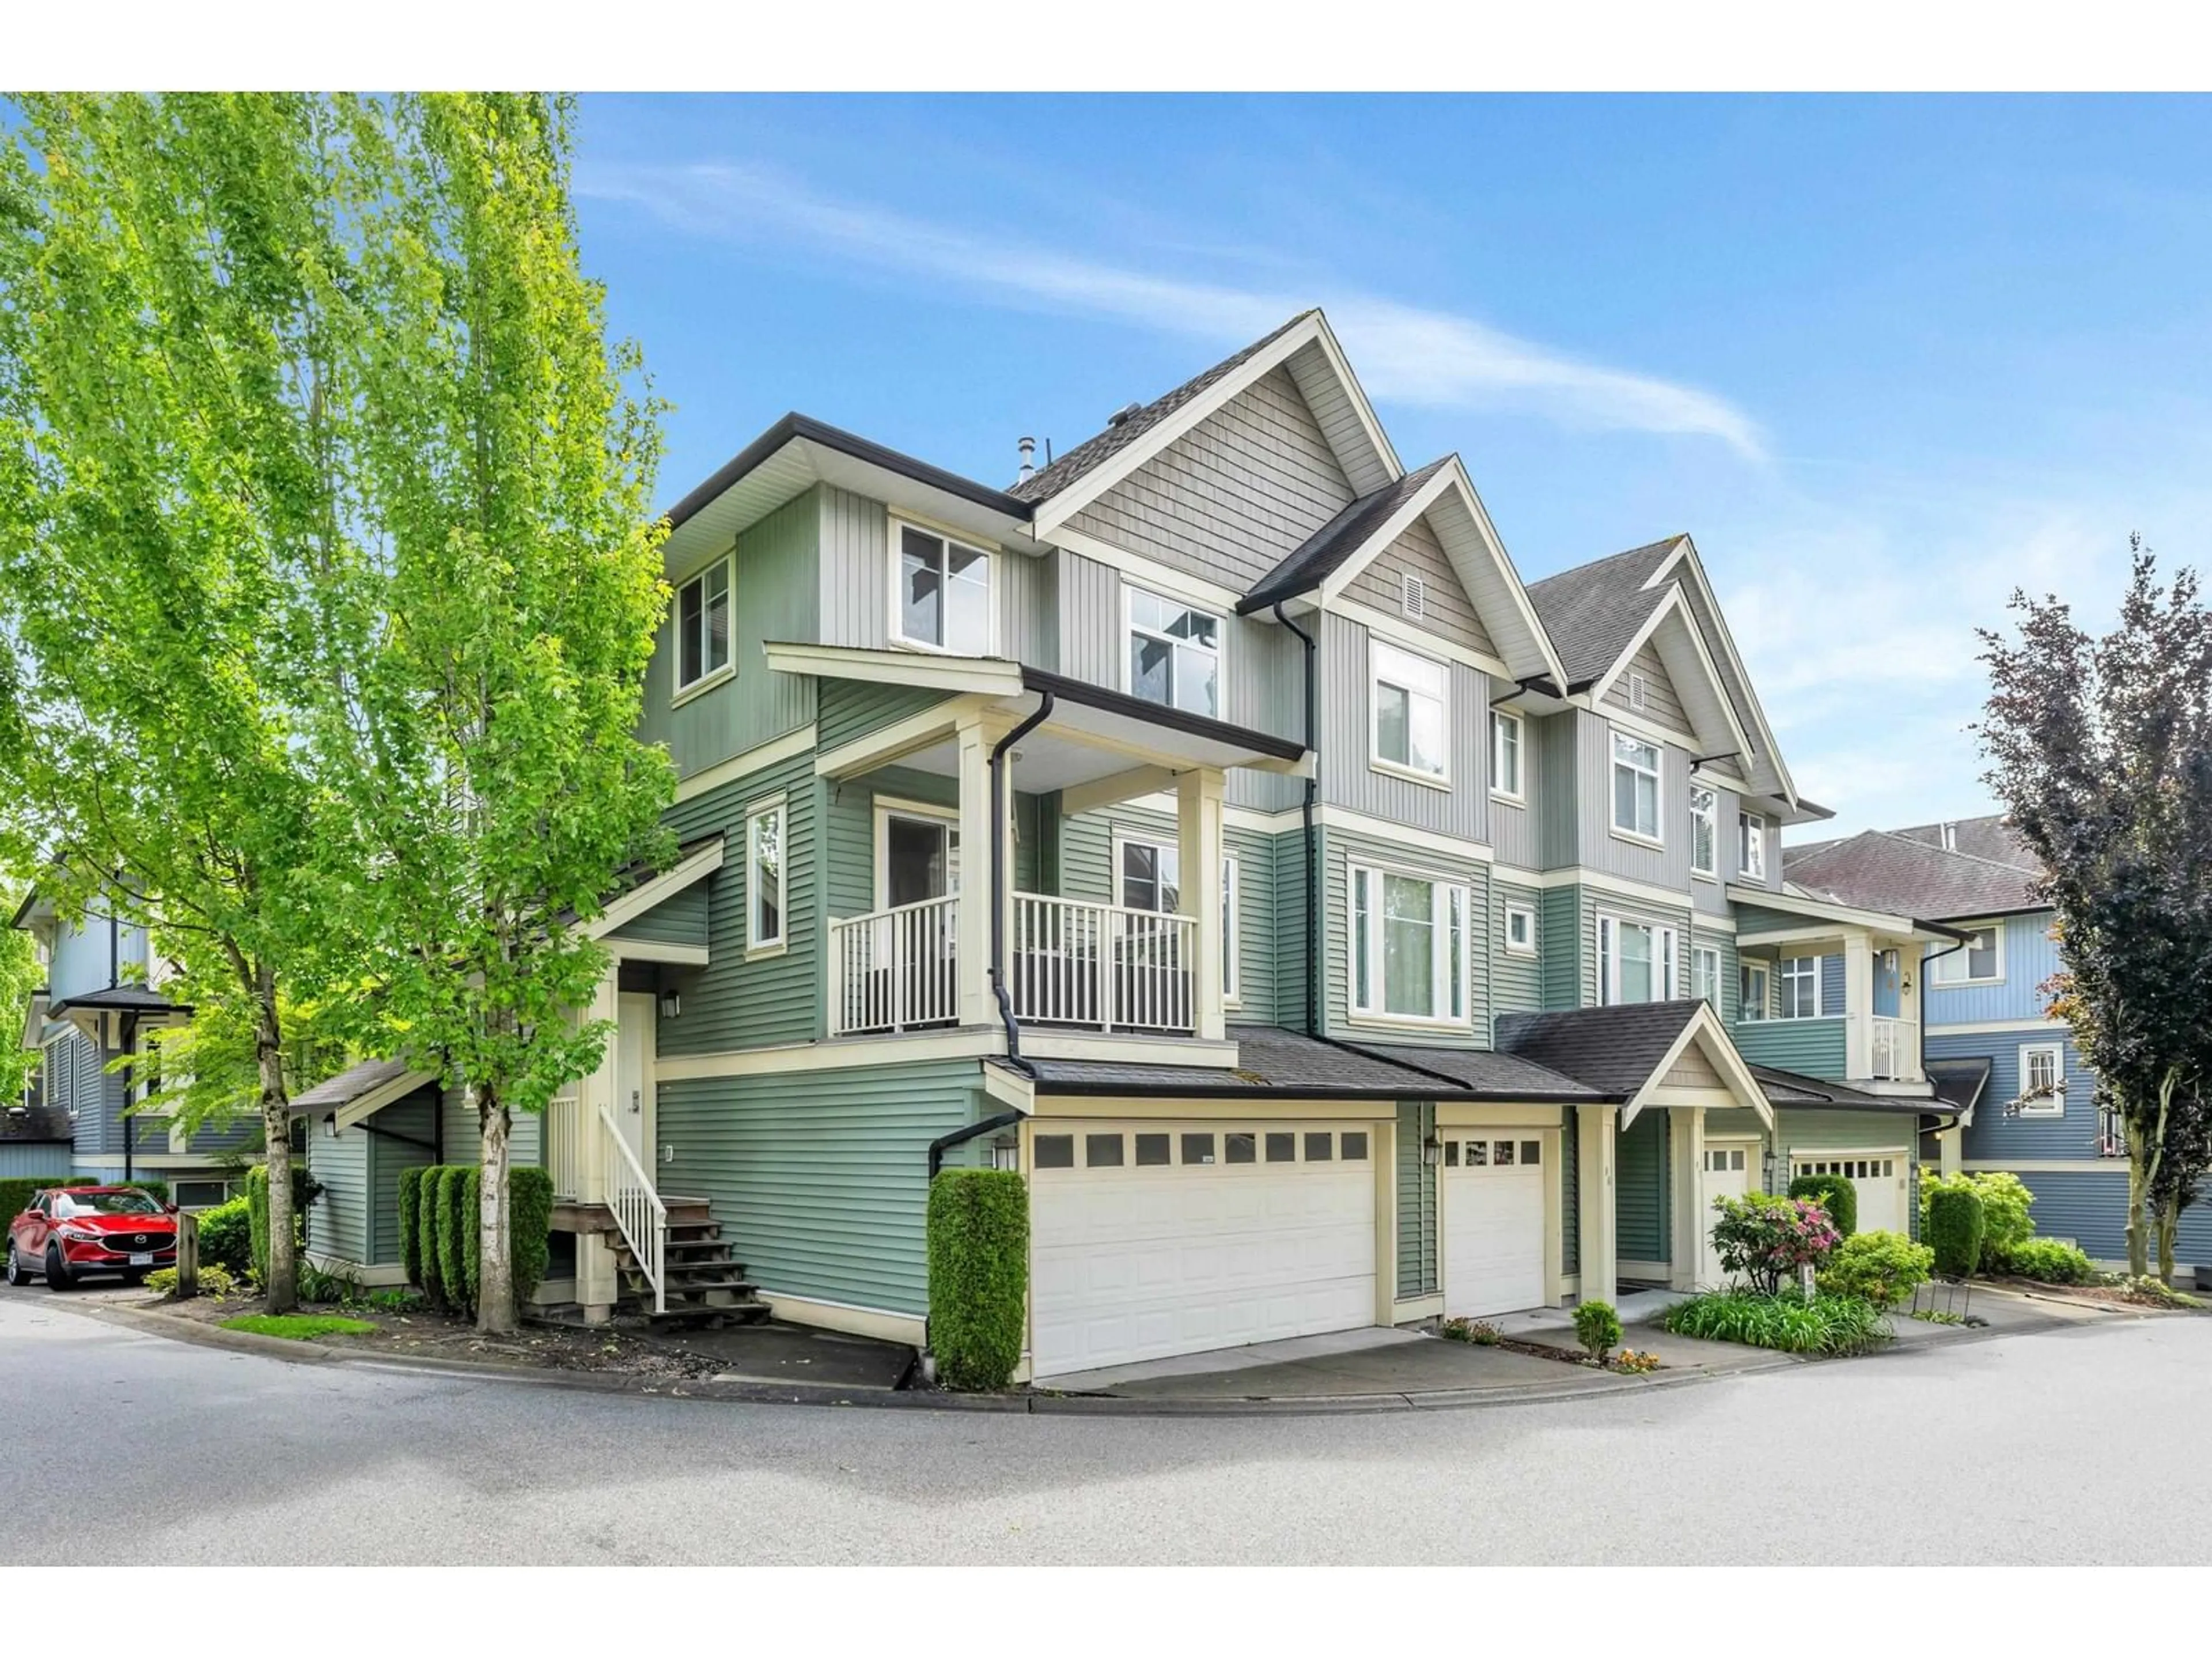 A pic from exterior of the house or condo for 95 6575 192 STREET, Surrey British Columbia V4N5T8